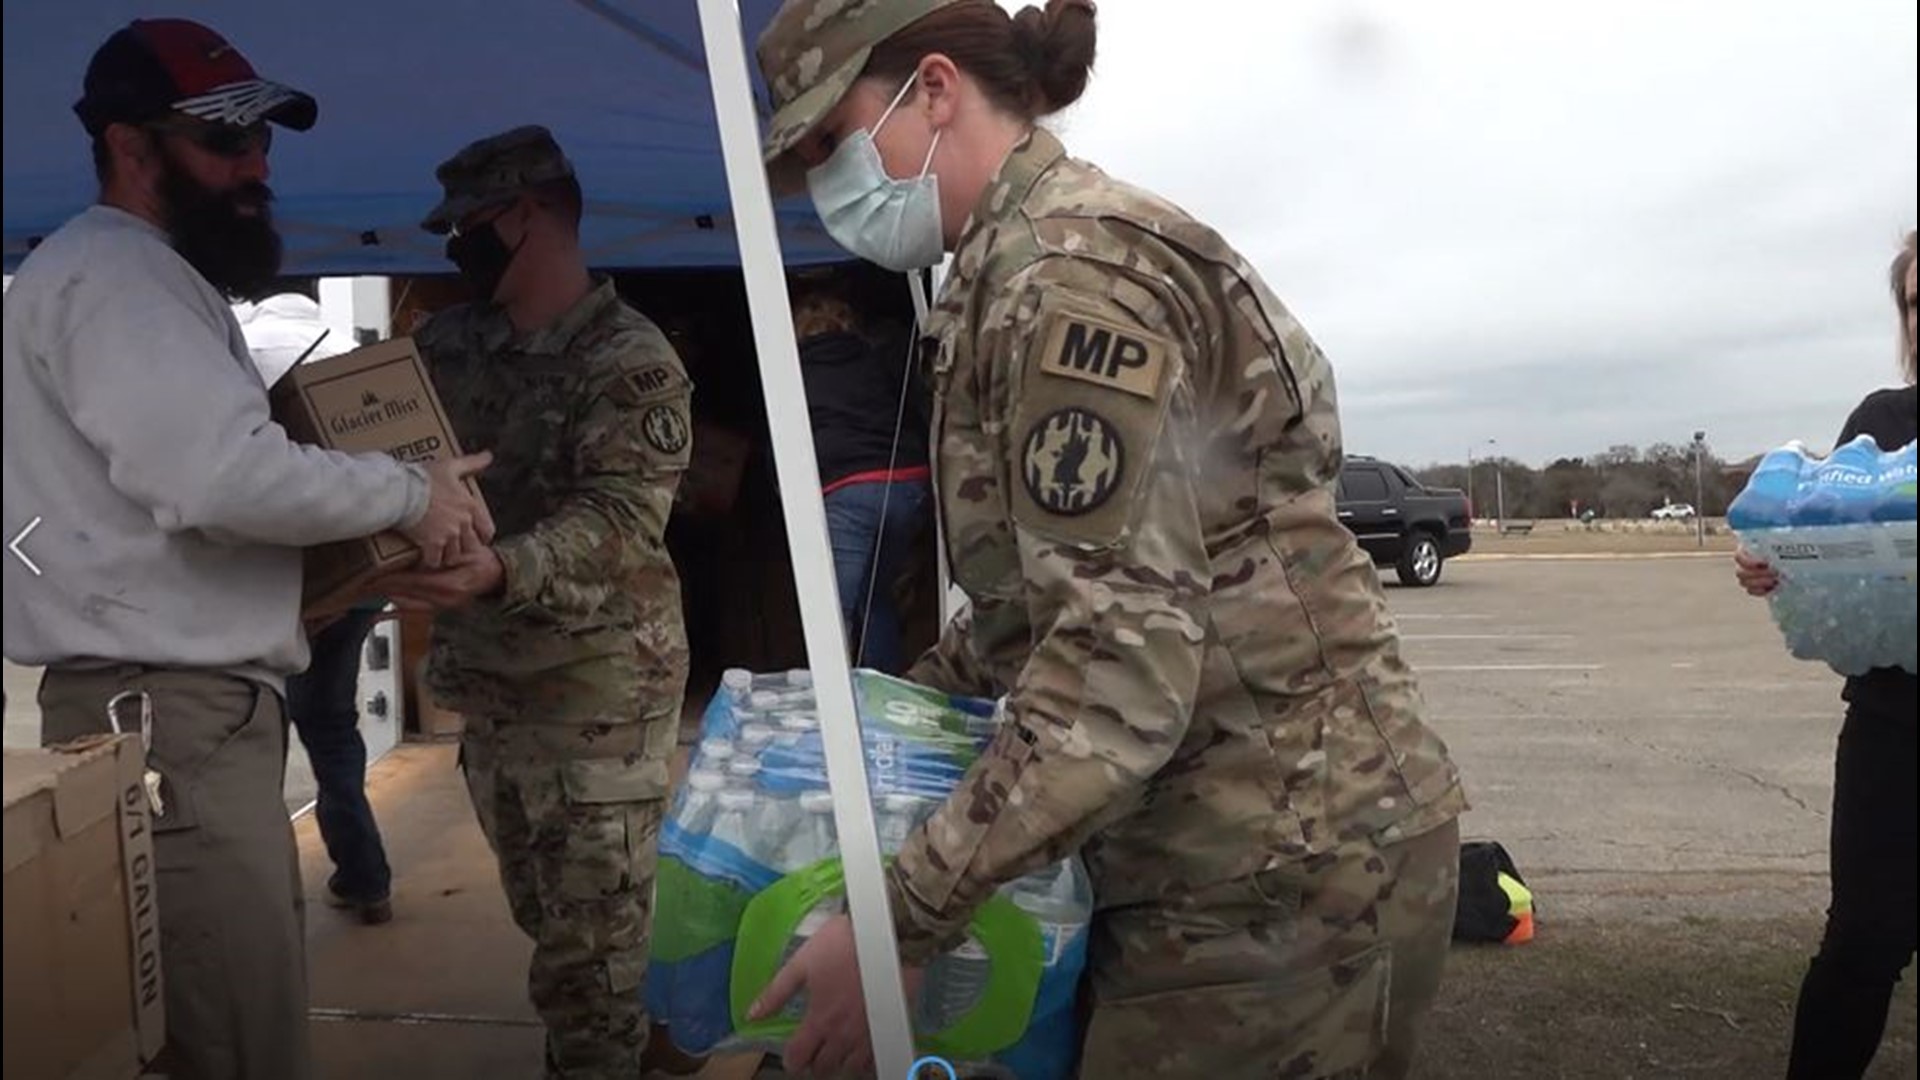 Boots were on the ground at Long Branch Park as Fort Hood soldiers were on a mission to serve.